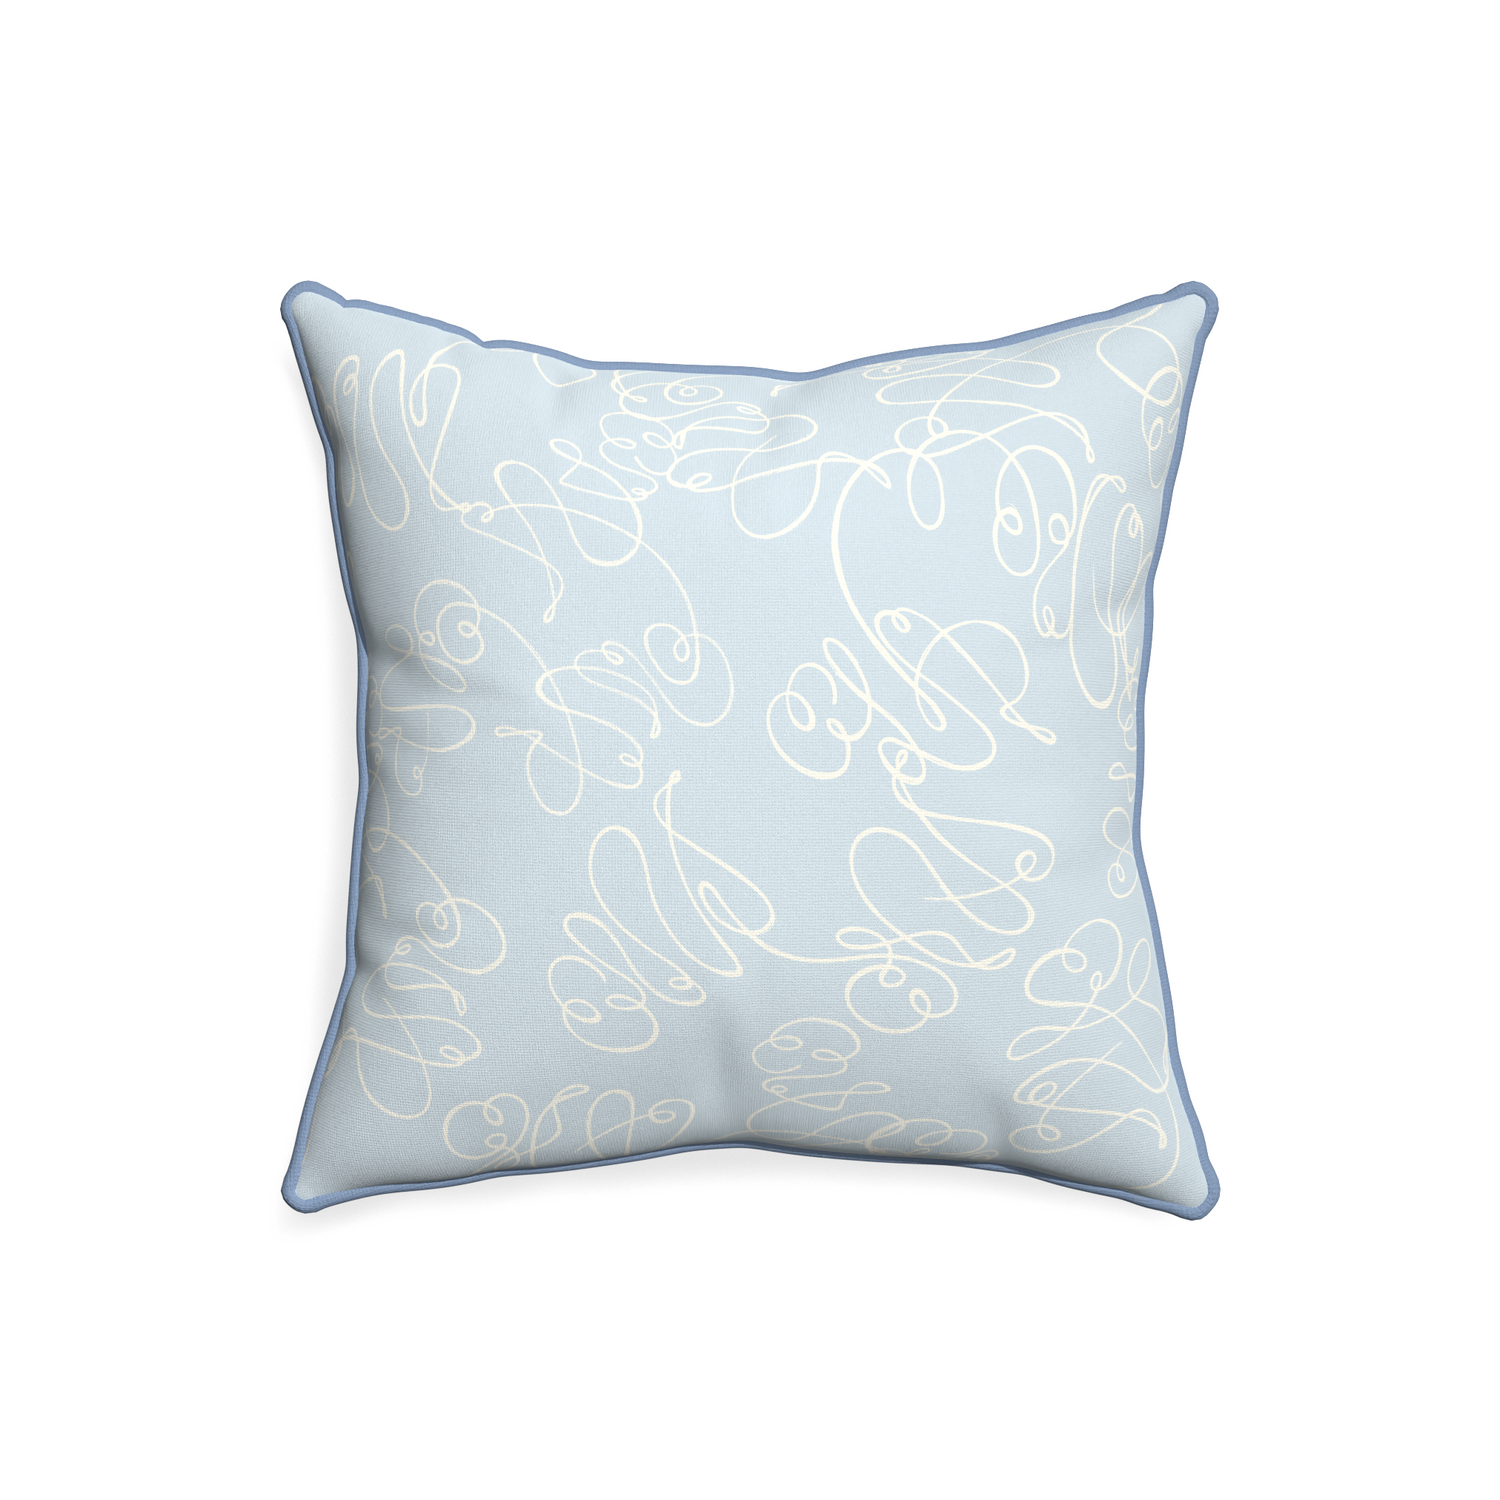 20-square mirabella custom pillow with sky piping on white background